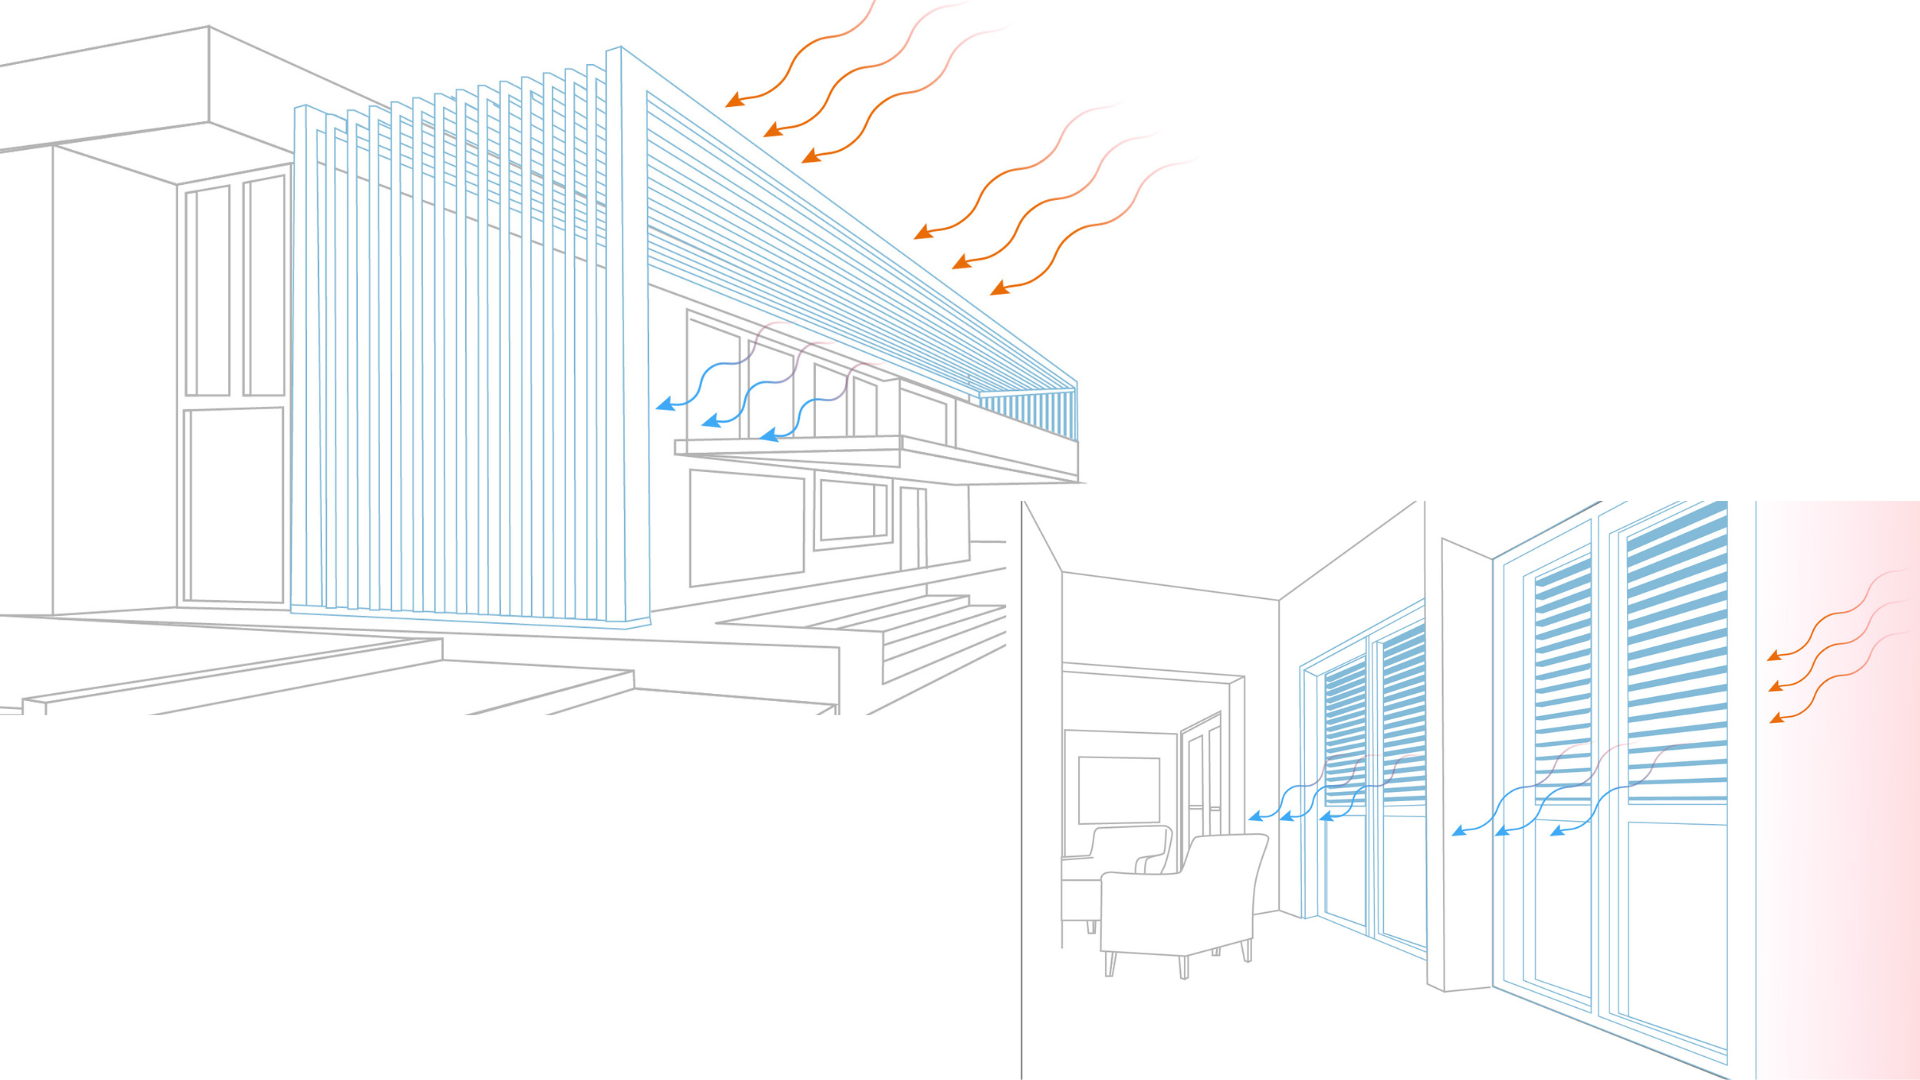 Shading Devices for a Net Zero Energy Building